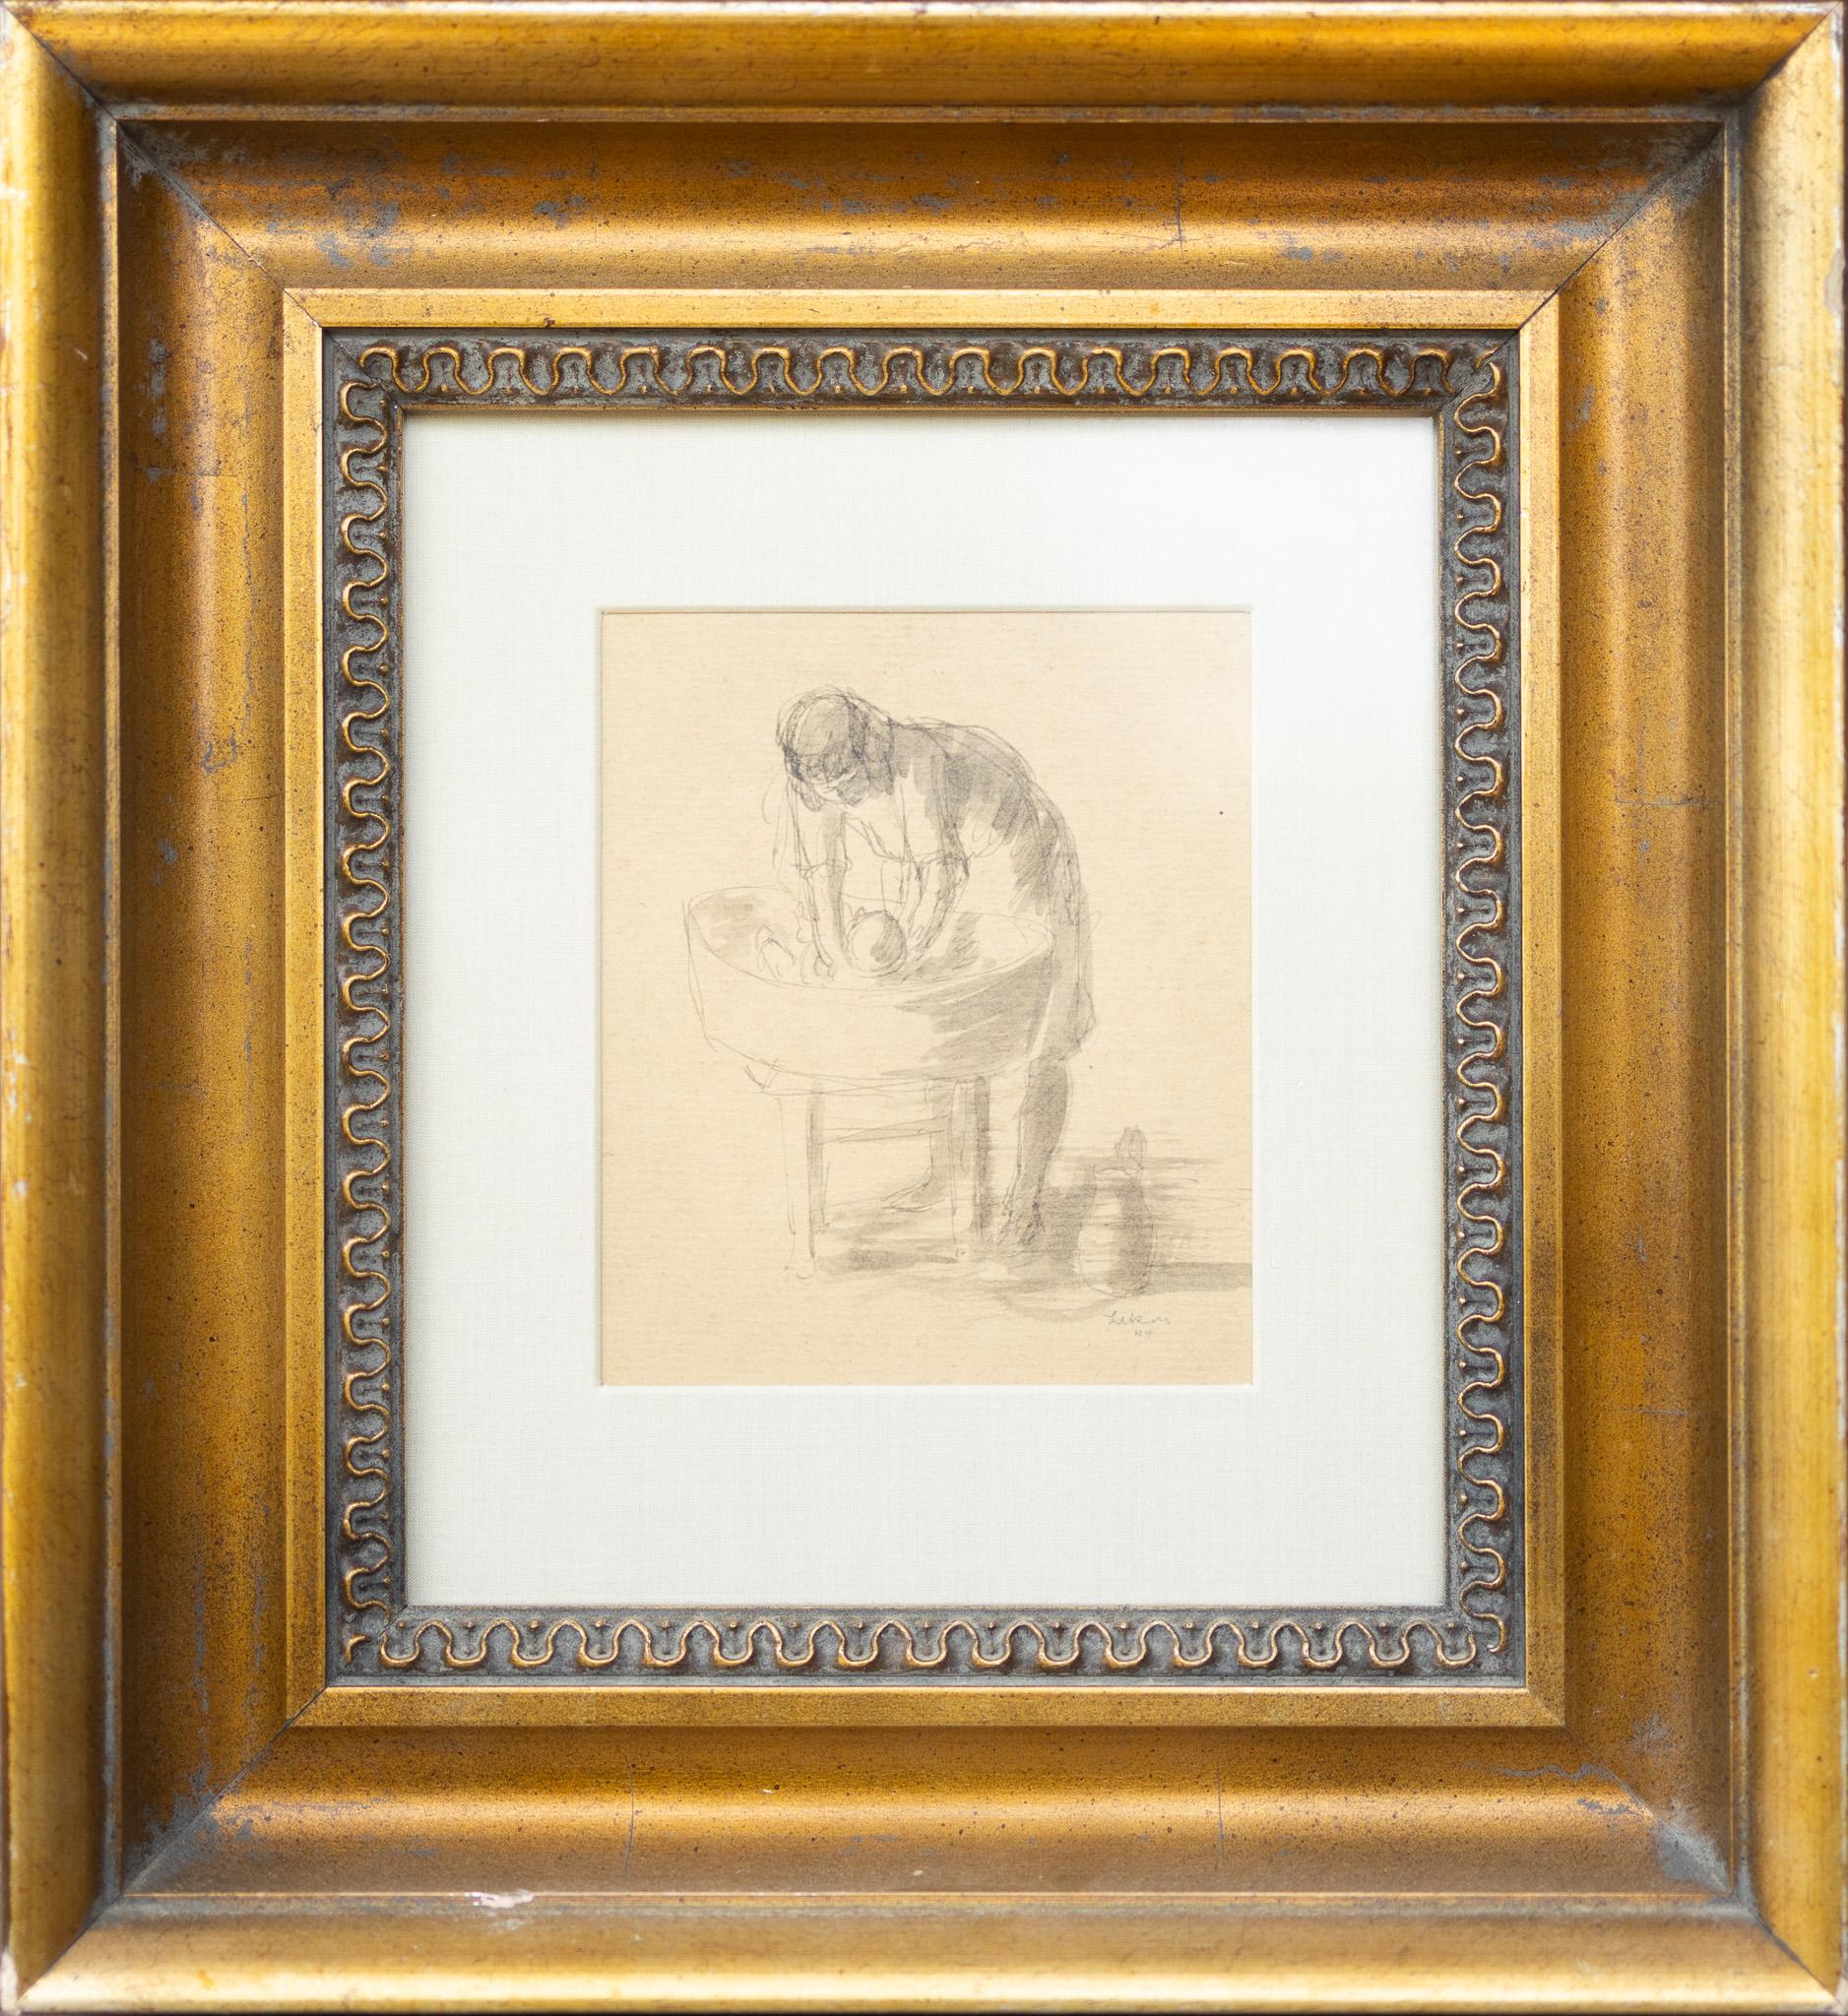 By Gustav Likan
A depiction of a mother putting her child to bed in a cradle, dated 1944.
6